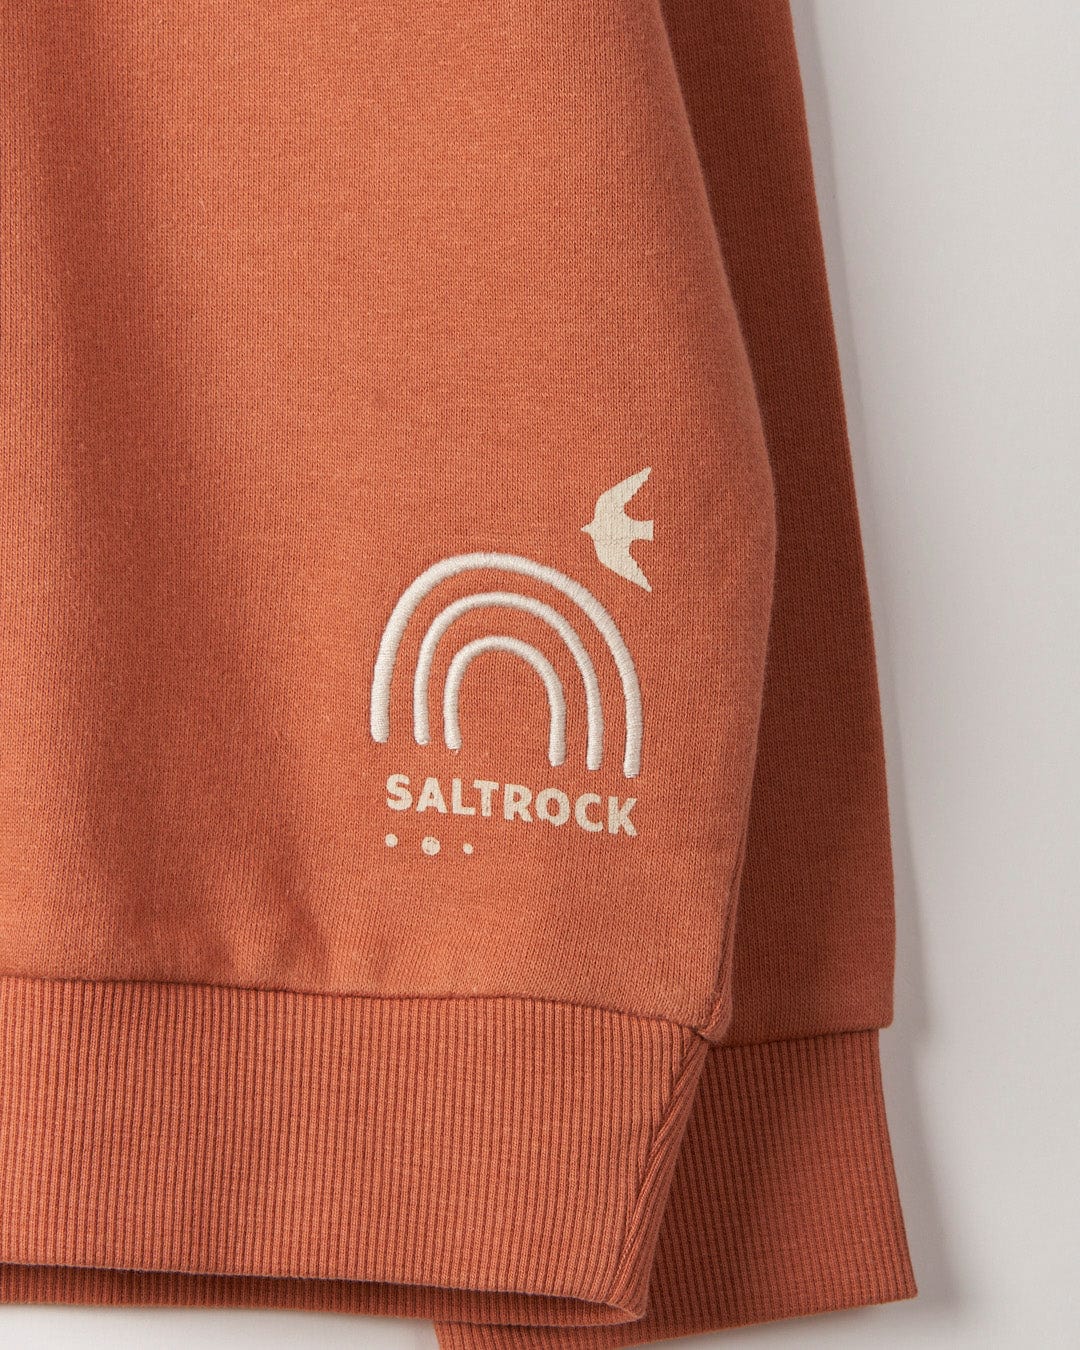 Close-up of the corner of a rust-colored, 100% cotton sweater featuring embroidered graphics with the word "Saltrock," a rainbow design, and a bird.